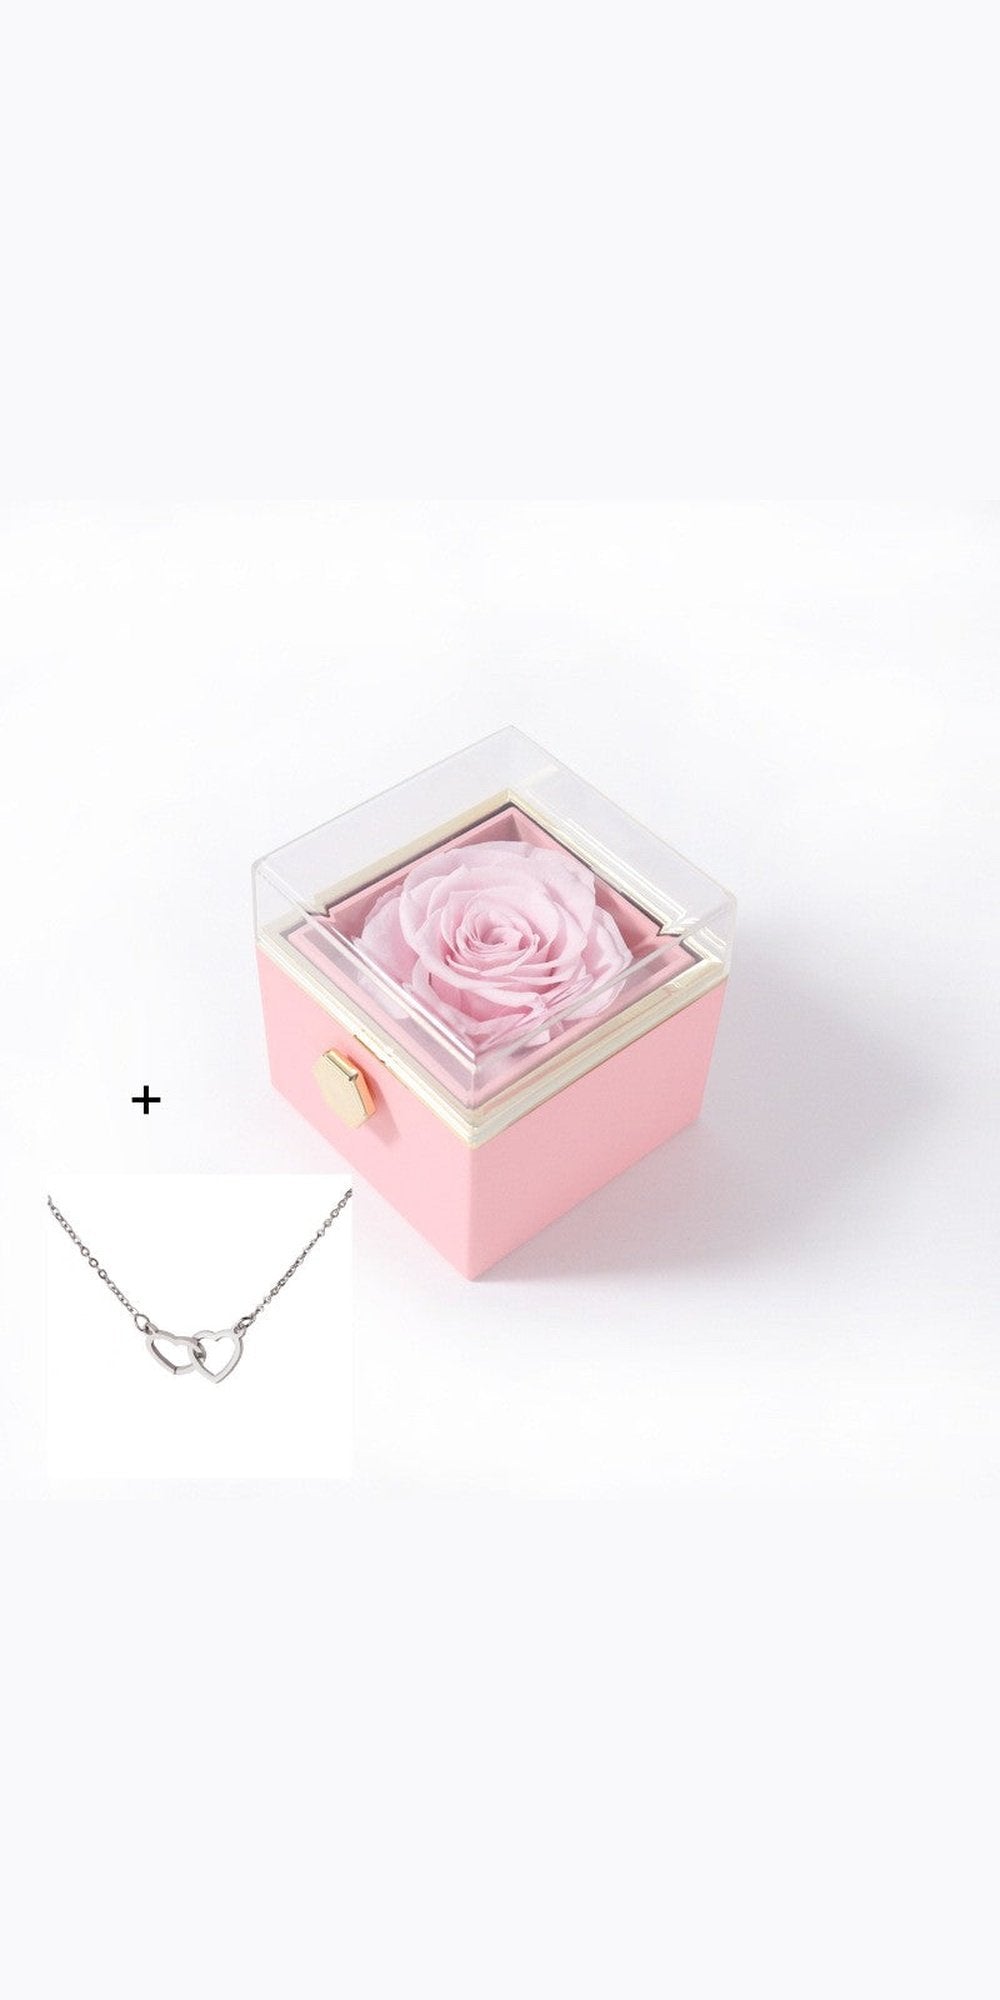 Acrylic Ring Box Valentine’s Day Proposal Confession - Pink